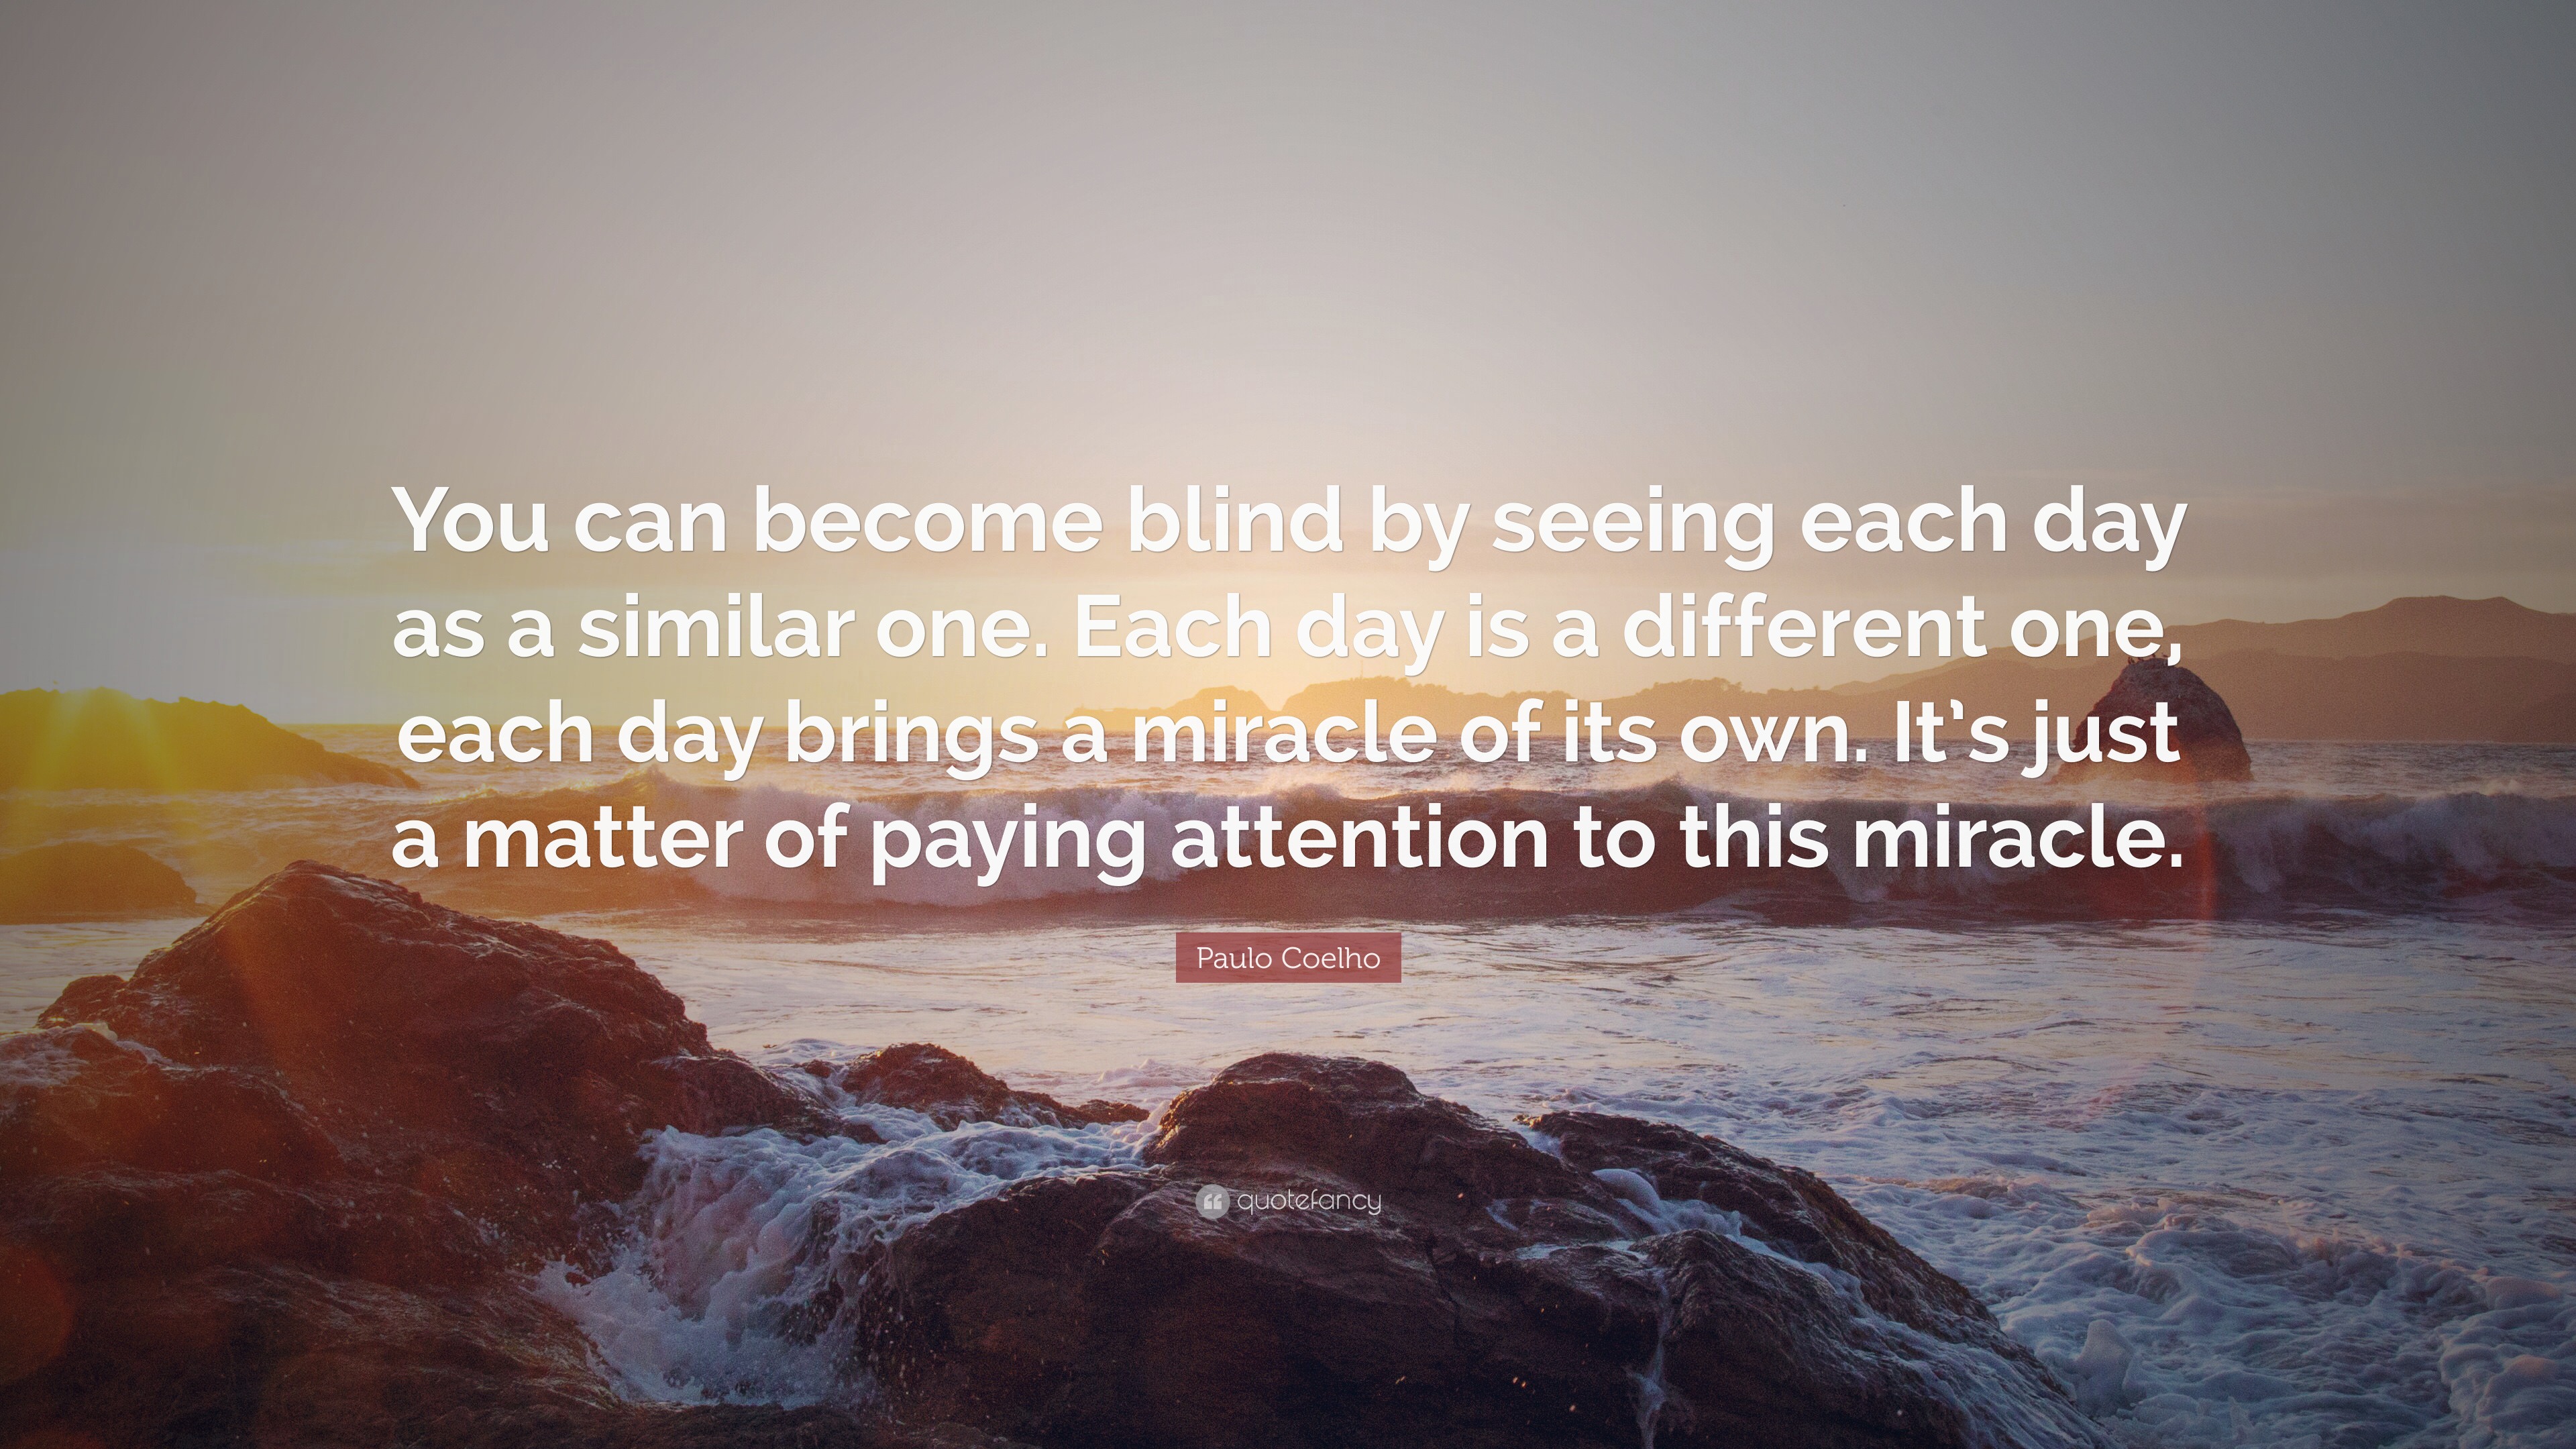 Paulo Coelho Quote: “You can become blind by seeing each day as a ...